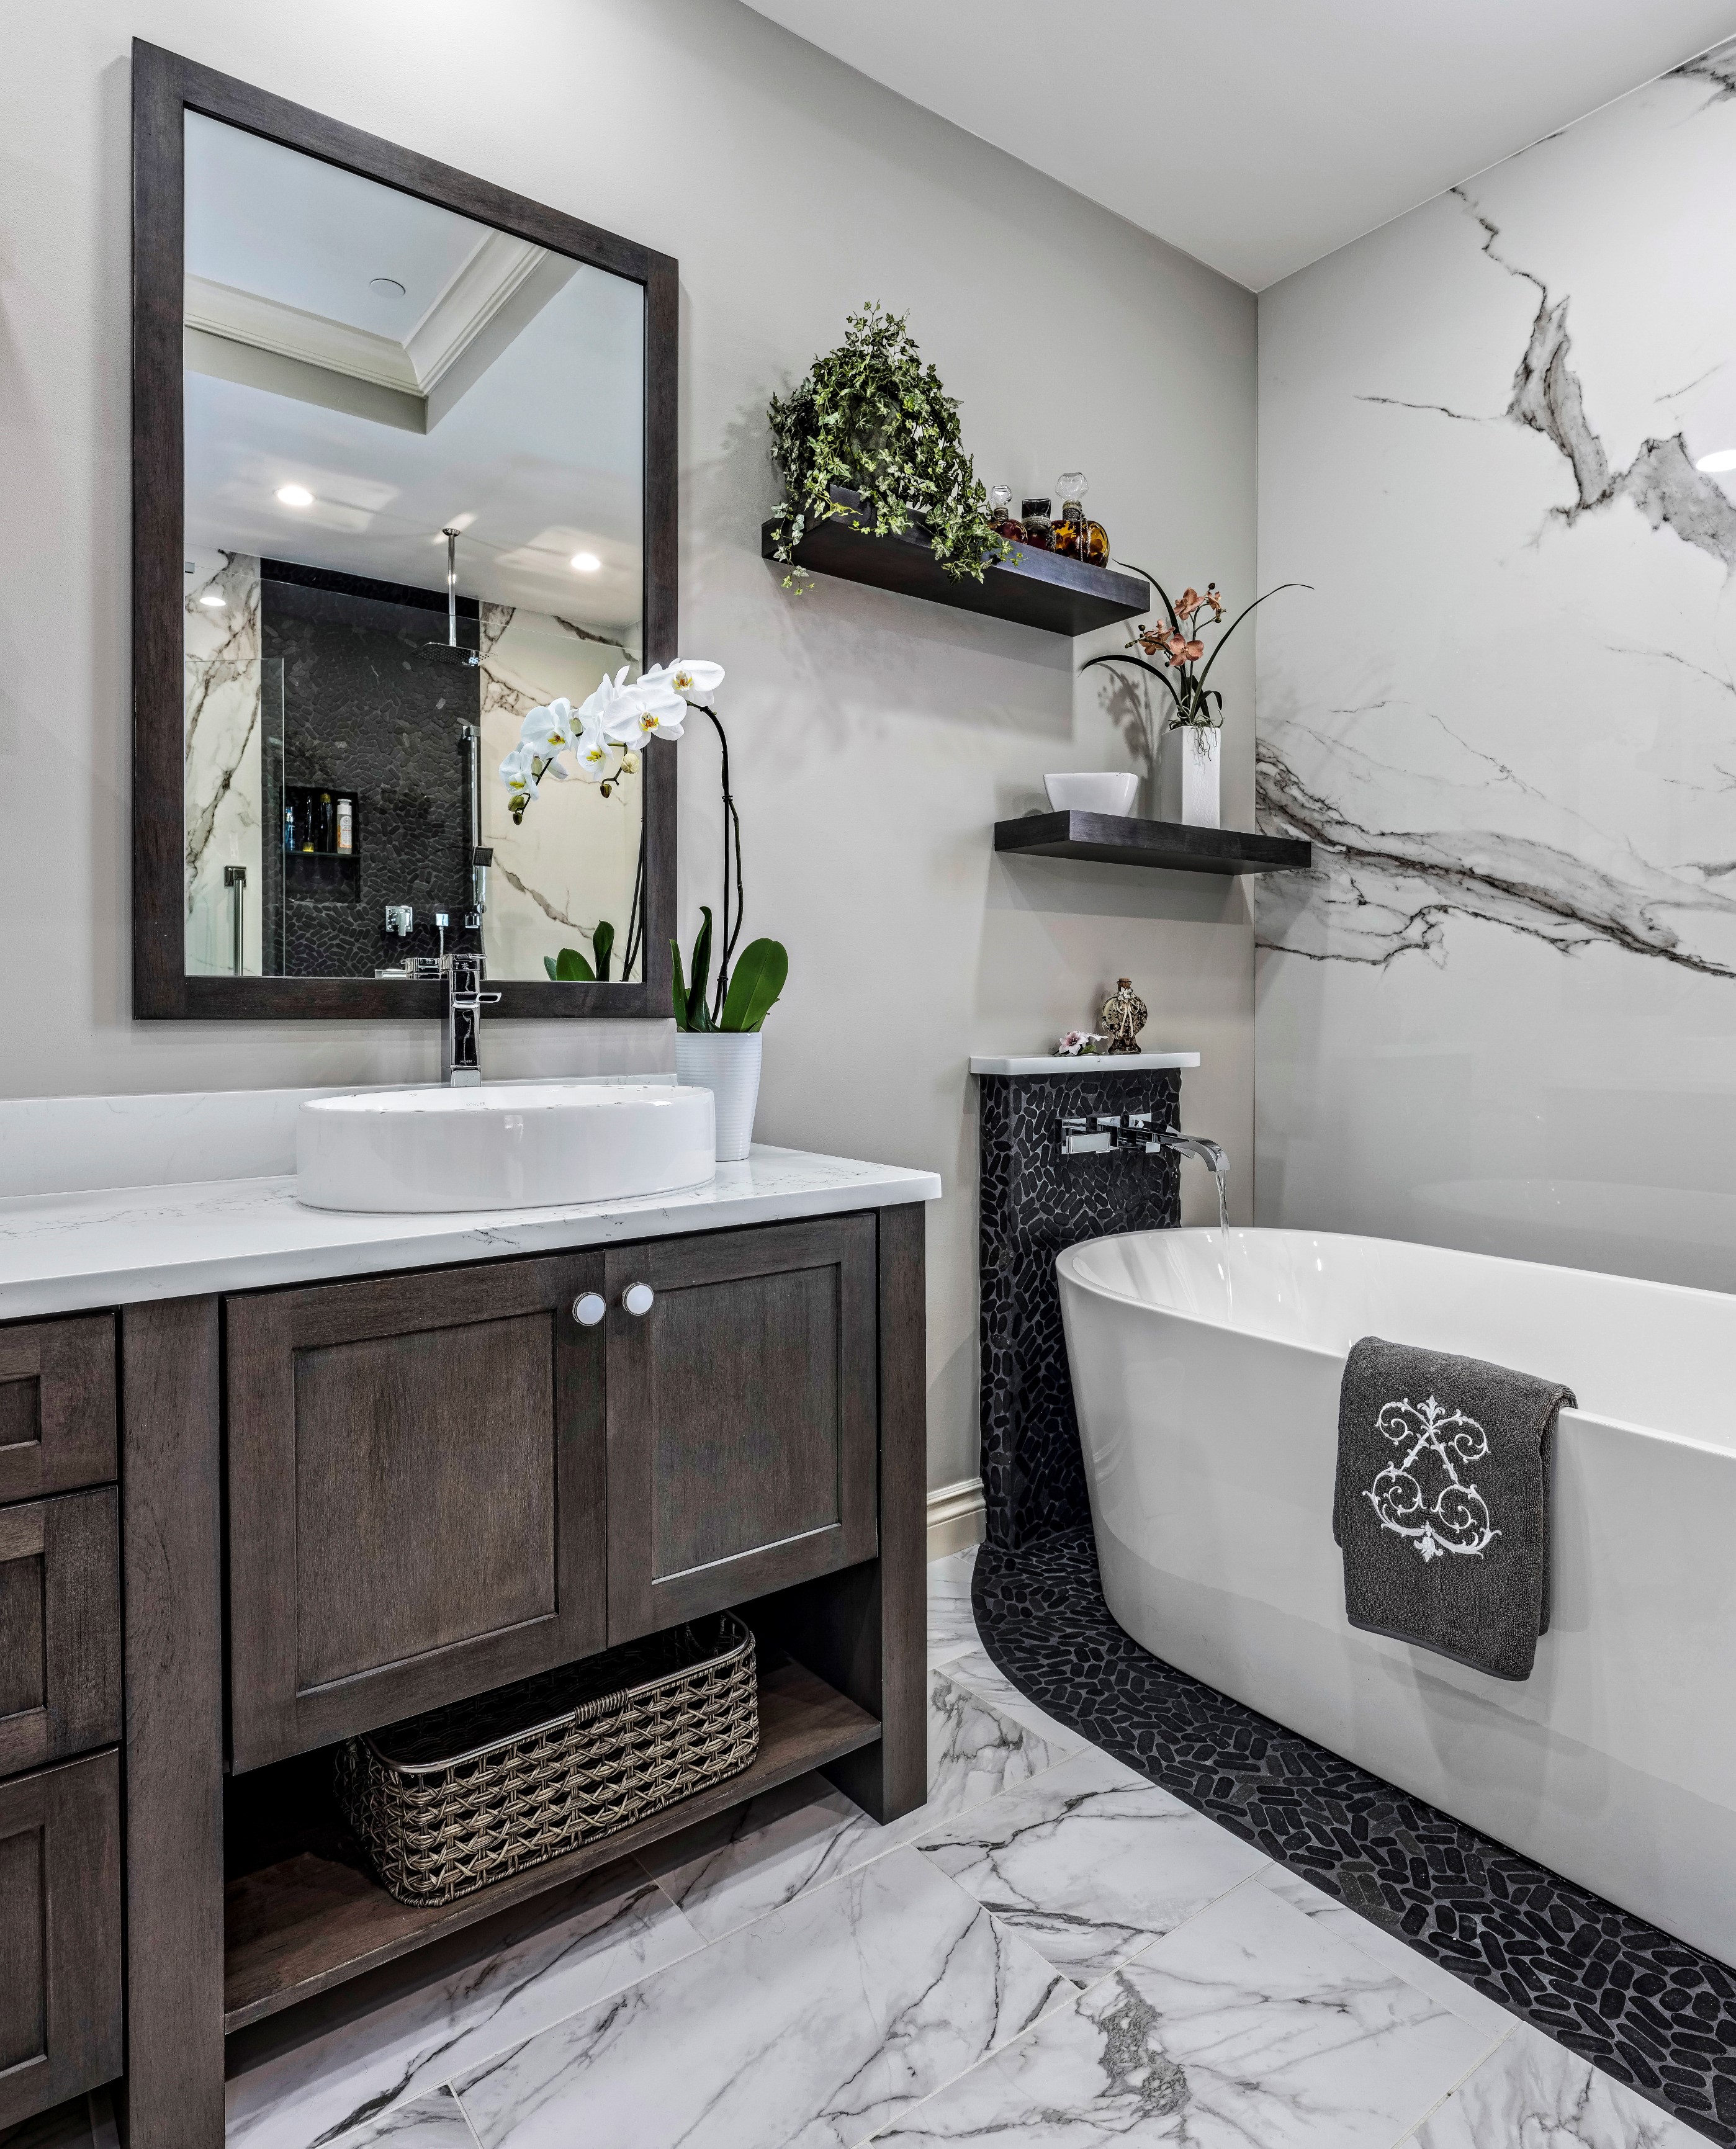 Bathroom Remodeling Typically Cost, Average Cost To Remodel Small Bathroom With Shower